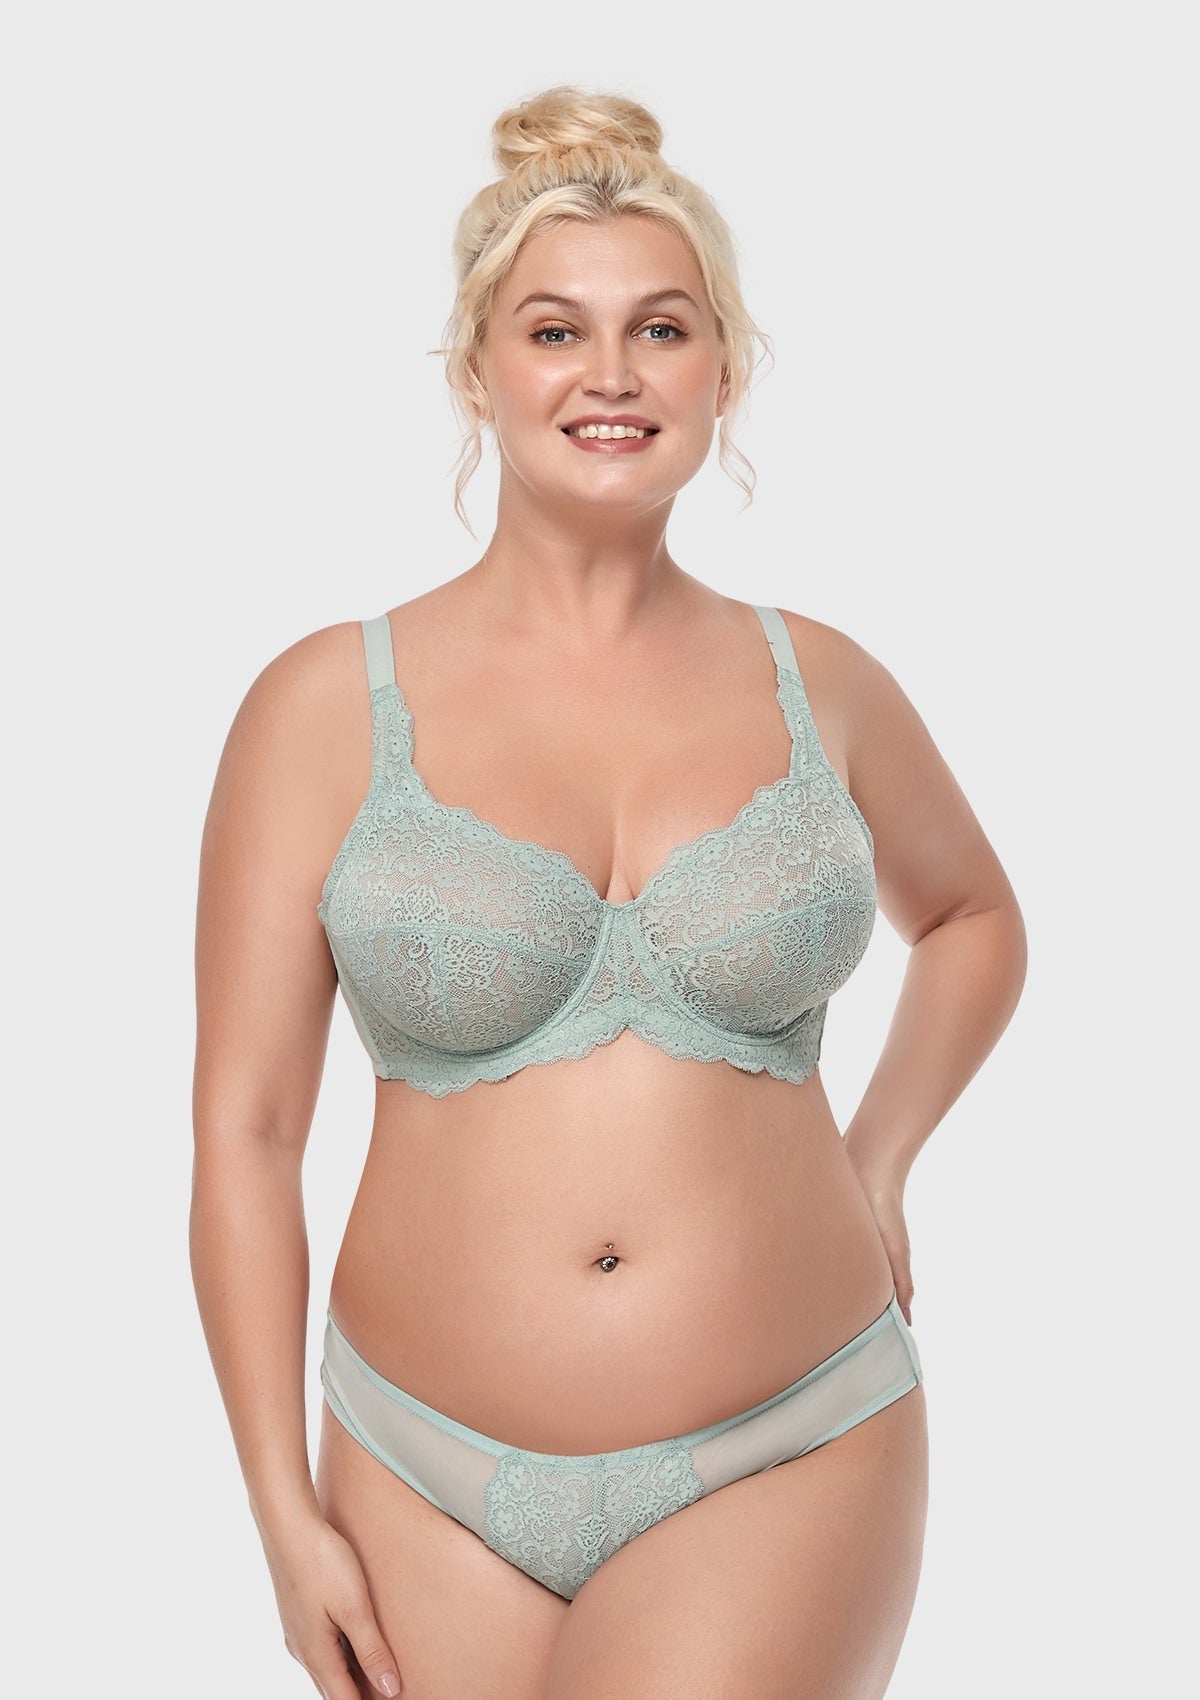 HSIA All-Over Floral Lace: Best Bra For Elderly With Sagging Breasts - Crystal Blue / 42 / D